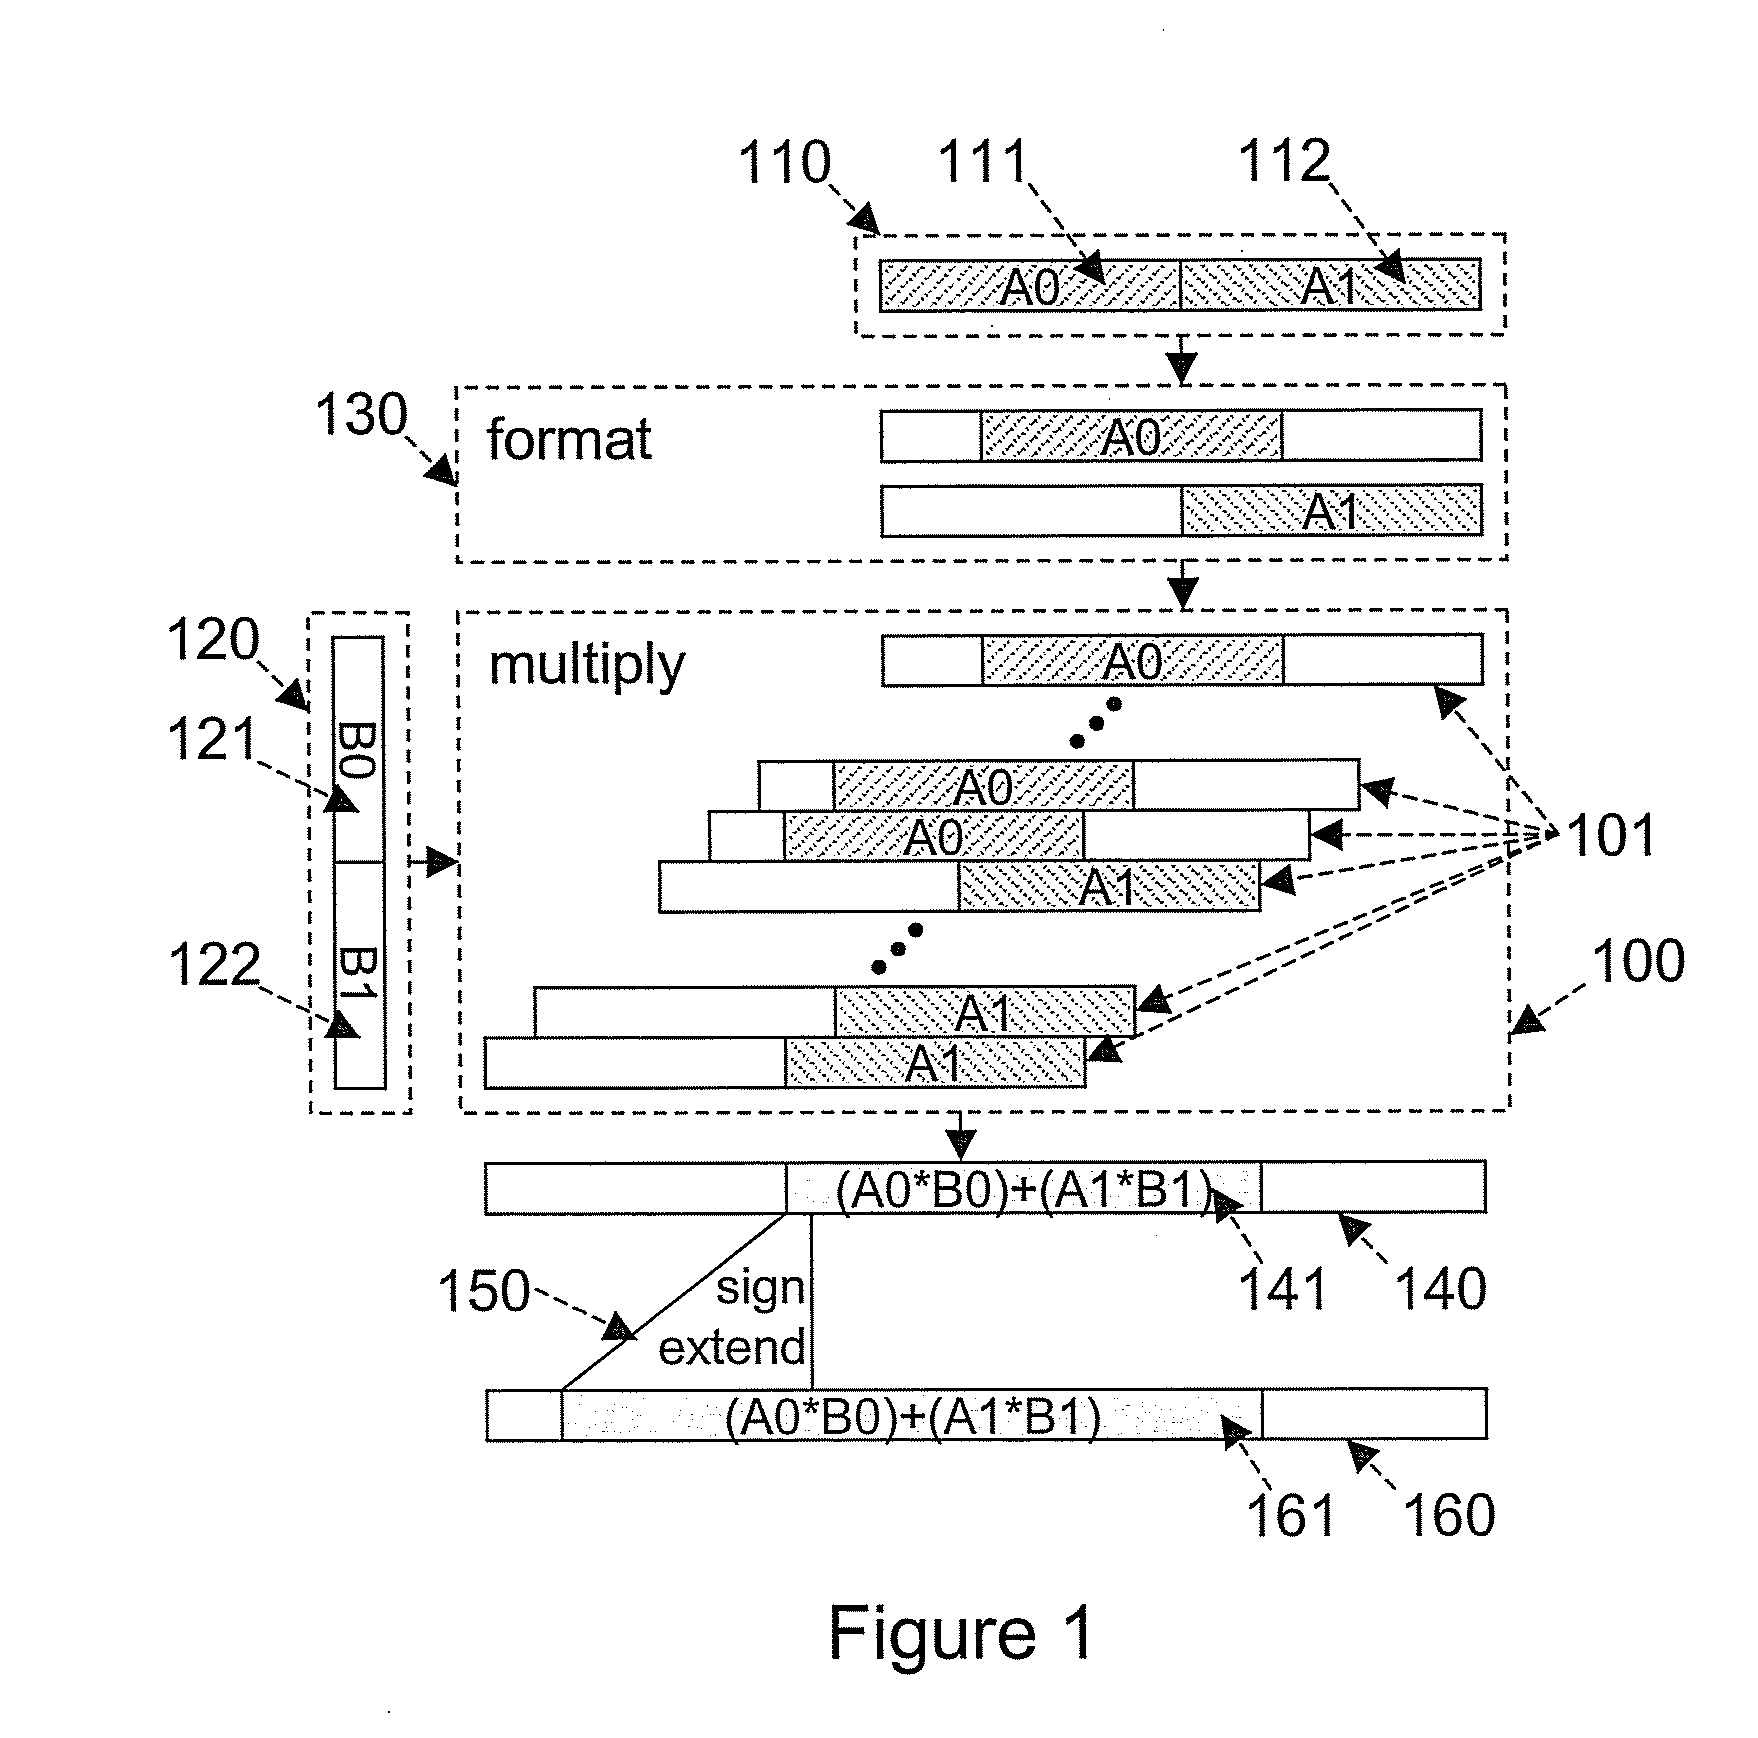 Method for sign-extension in a multi-precision multiplier